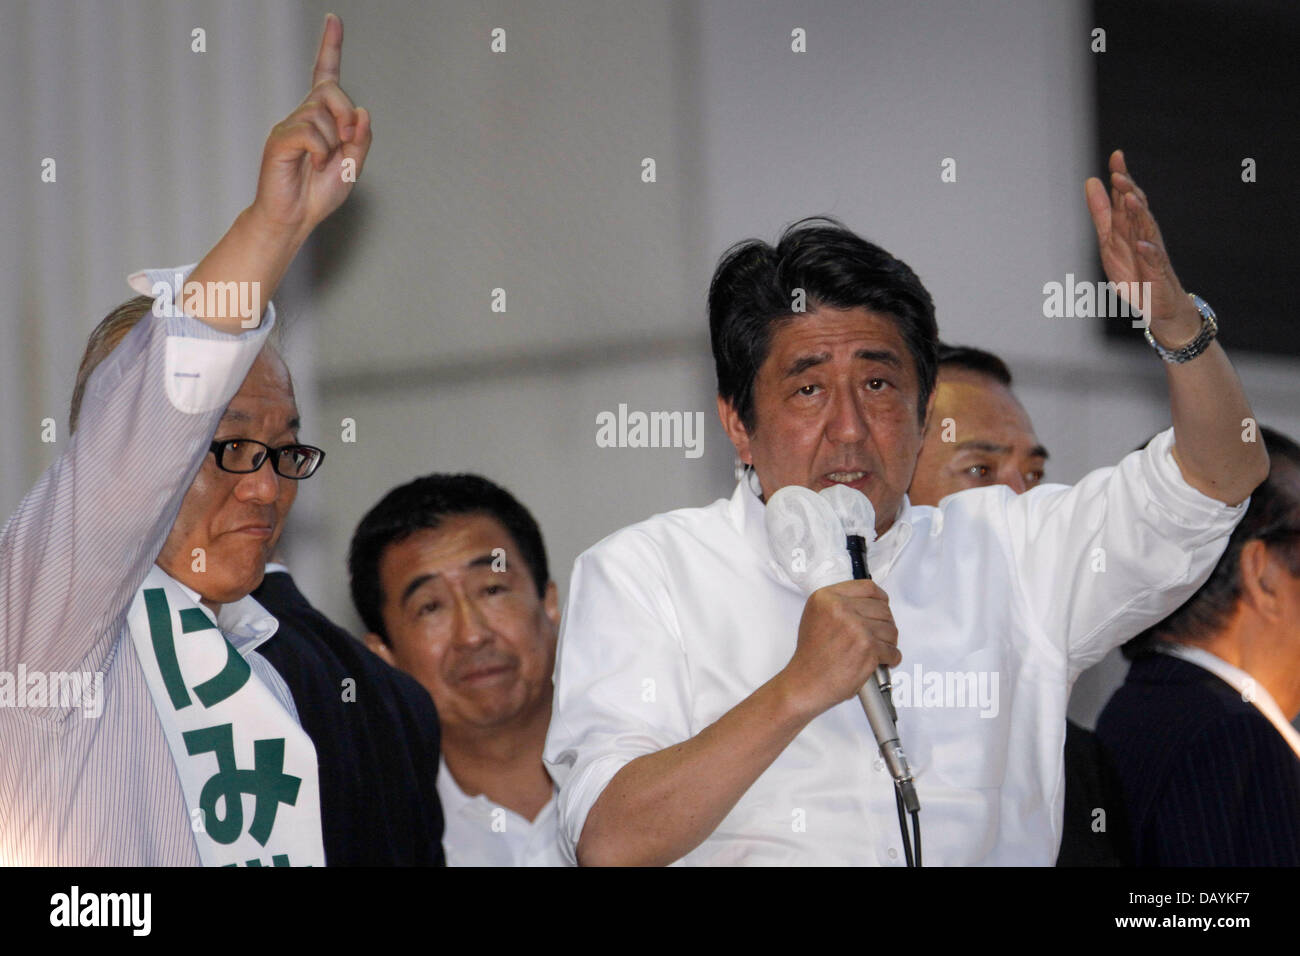 Tokyo, Japan. 20th July, 2013. Shinzo Abe, Japan's Prime Minister and president of the ruling Liberal Democratic Party, in his shirt sleeves solicits votes for the party's candidate on his final stumping tour at Tokyo's Asakusa district on Saturday, July 20, 2013, as he wraps up official campaigning for Sunday's upper house election. The ruling coalition led by Abe's LDP is likely to win a comfortable majority that will give him a total control of both chambers of Japan's parliament. Credit:  Aflo Co. Ltd./Alamy Live News Stock Photo